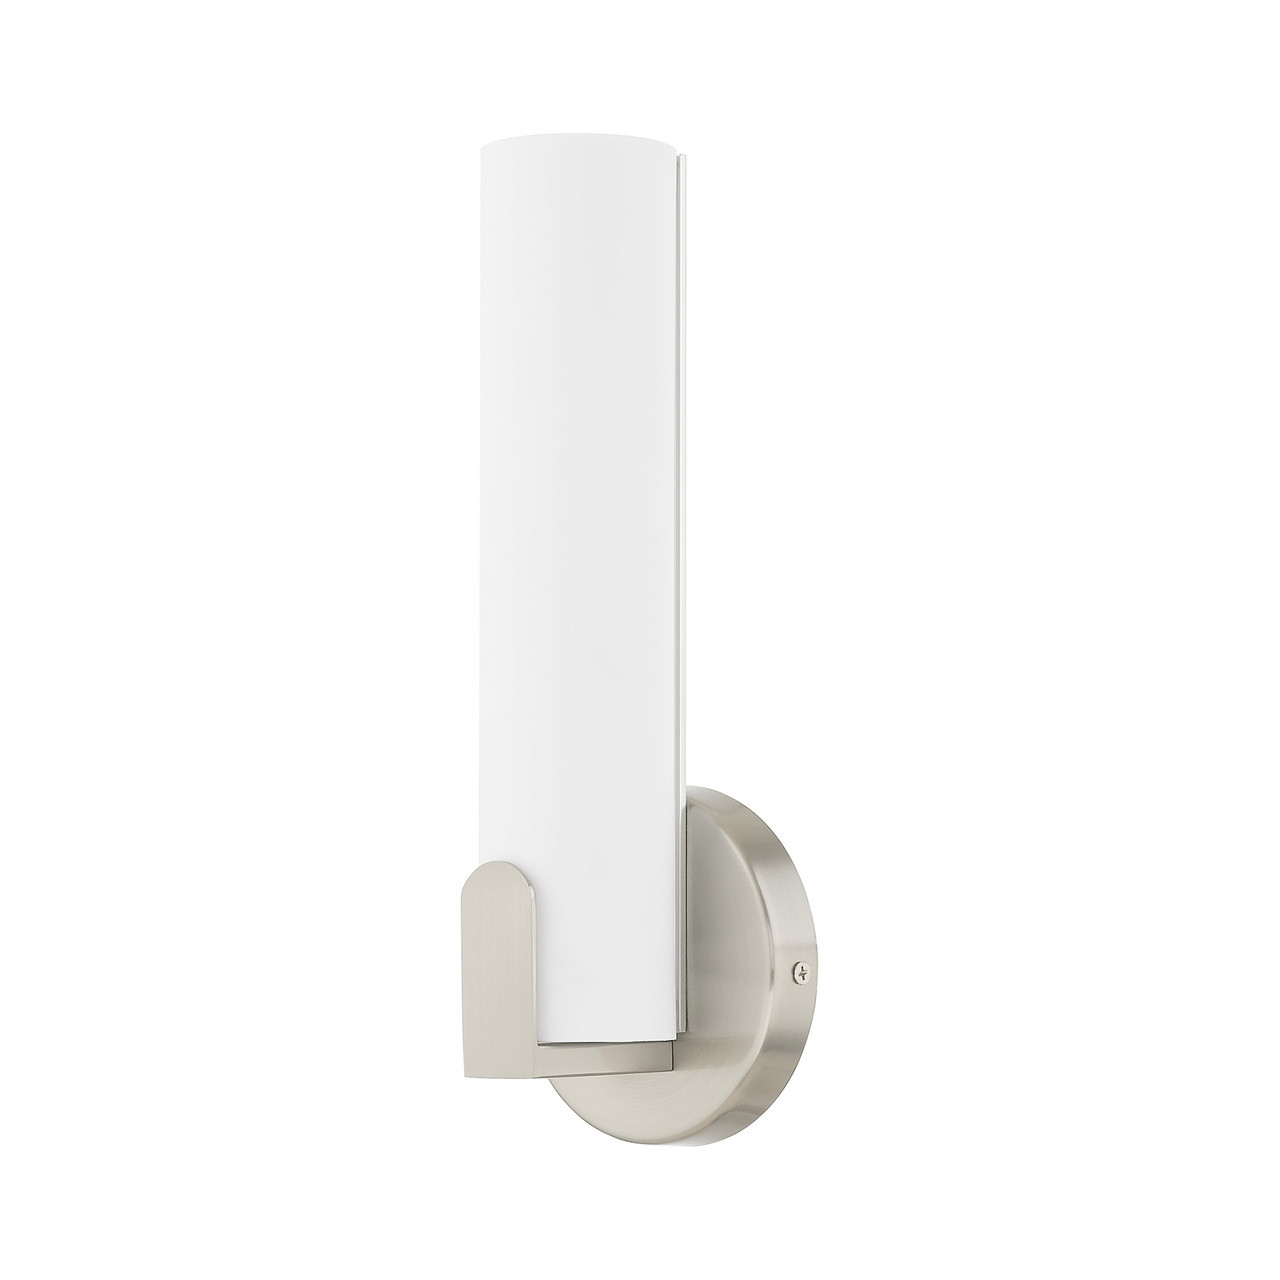 LIVEX LIGHTING 16361-91 10W LED Brushed Nickel ADA Wall Sconce